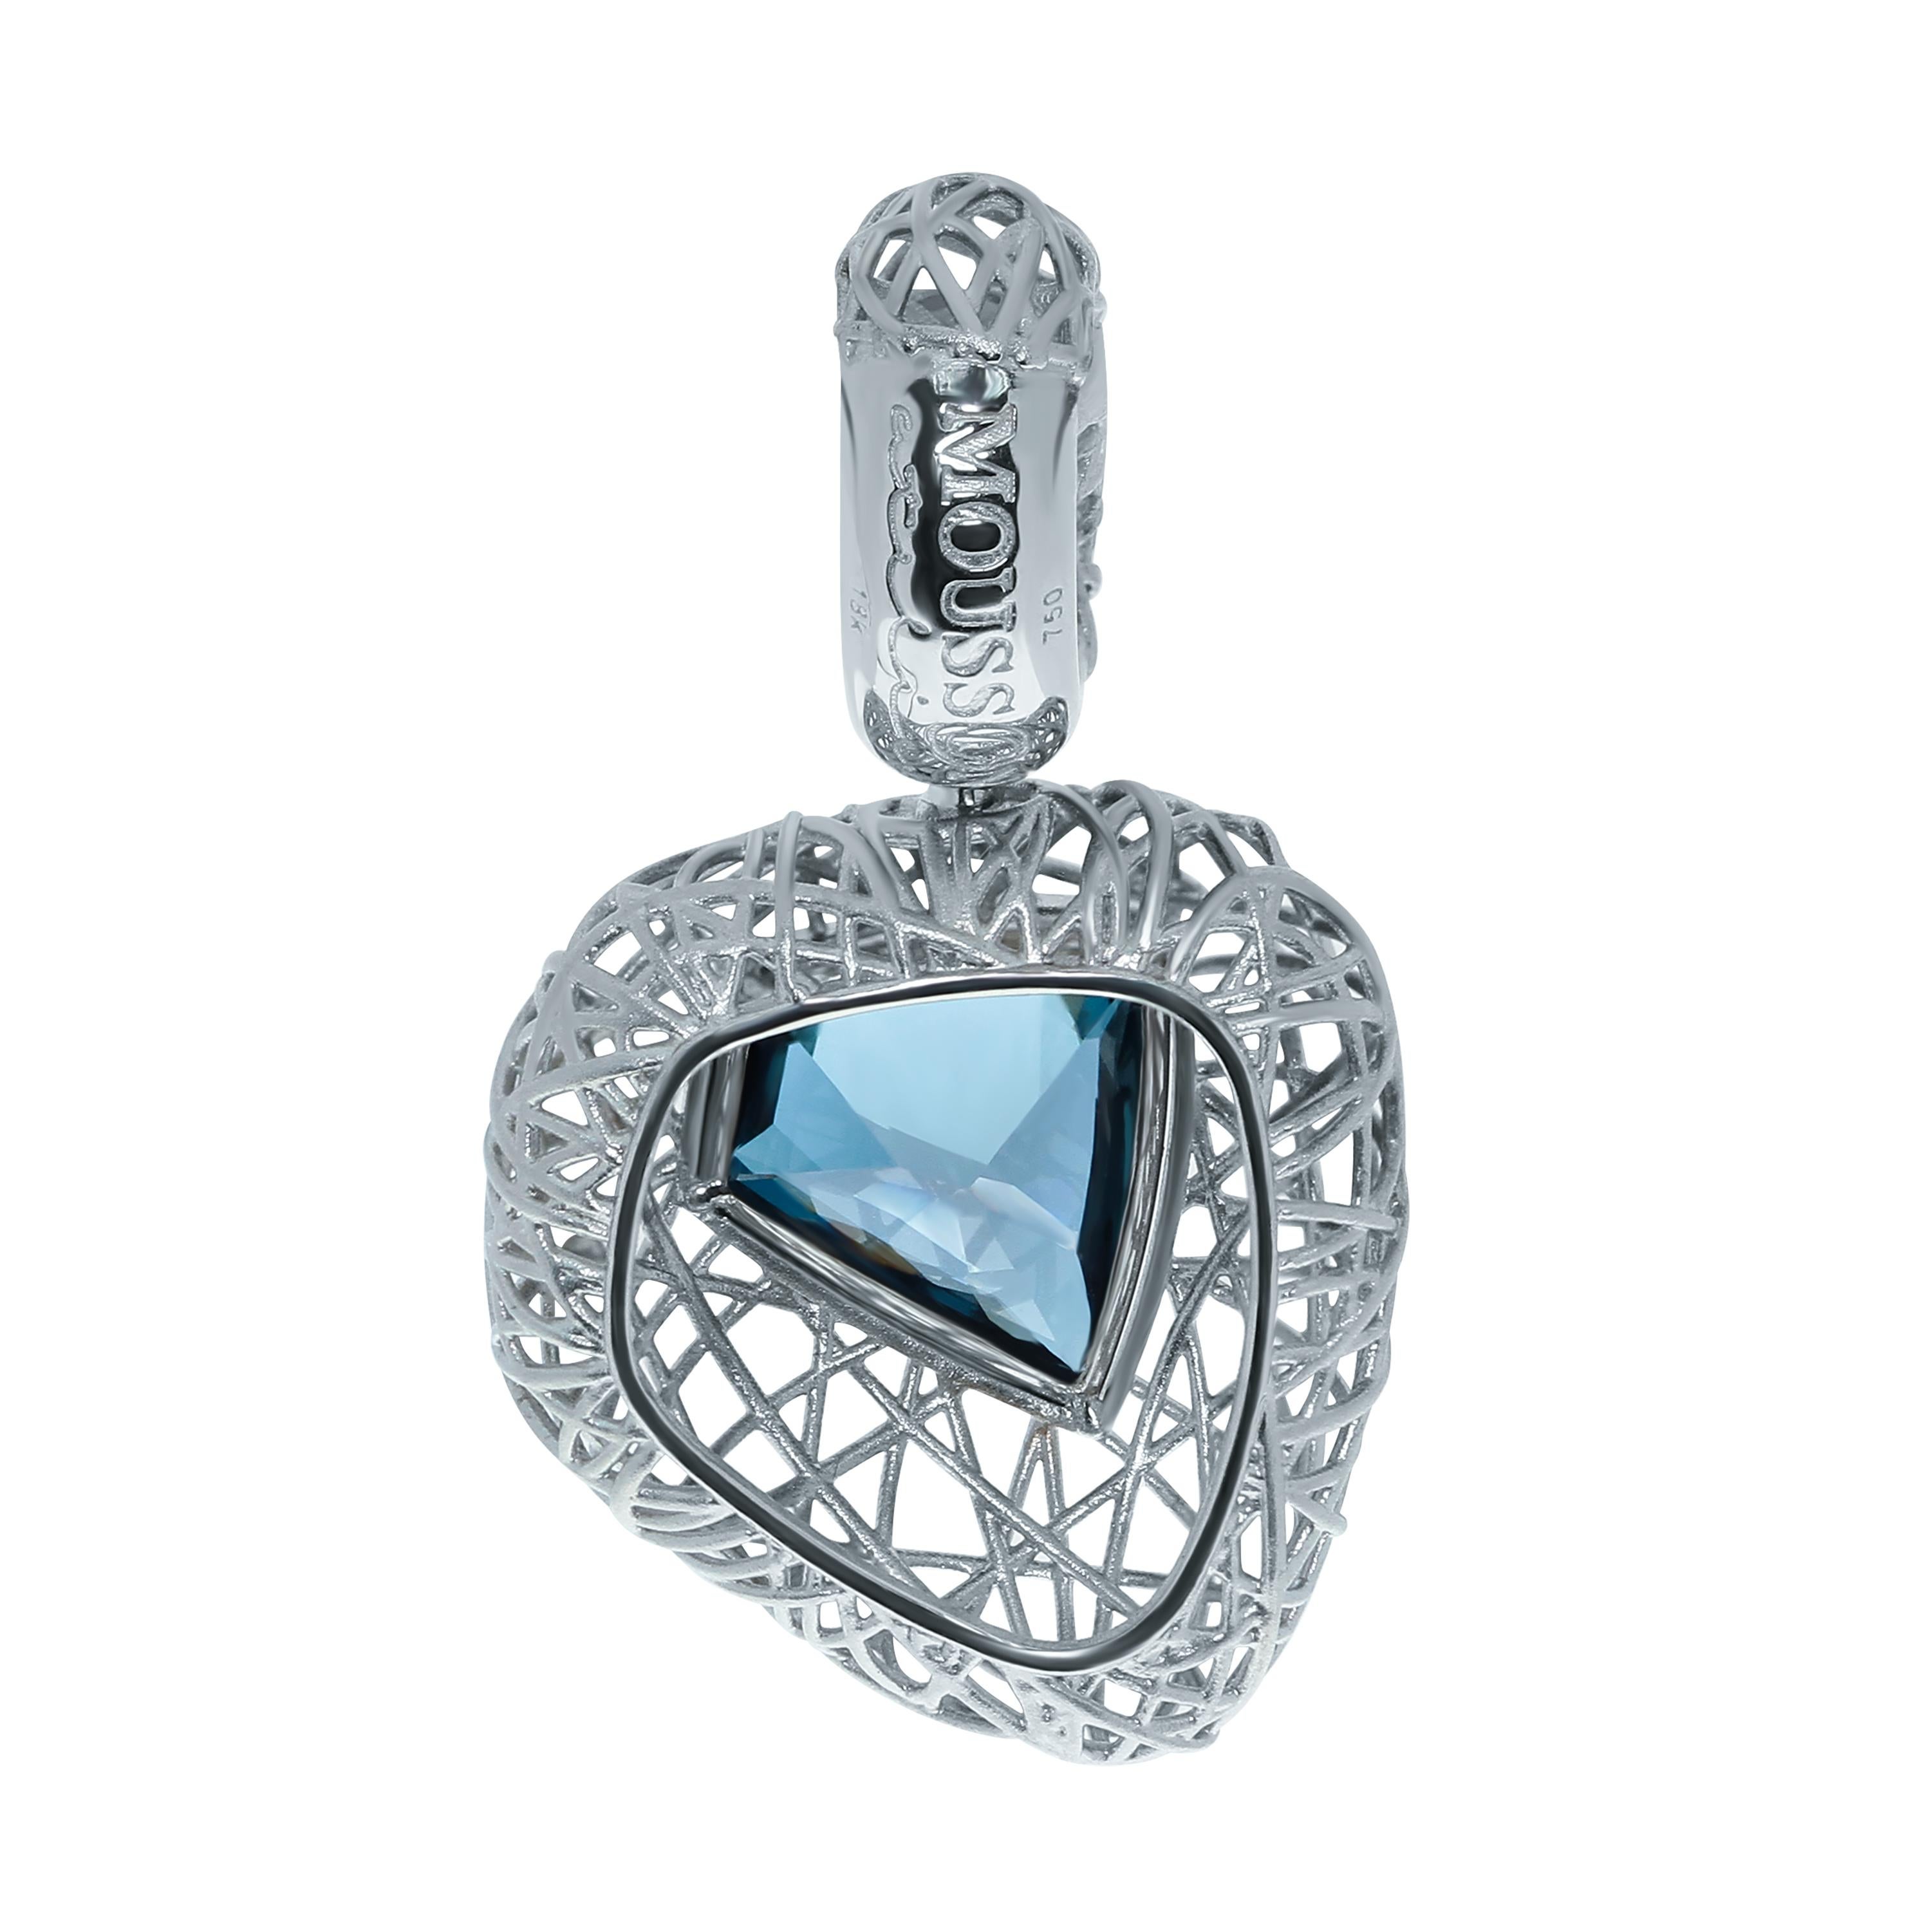 London Topaz 2.60 Carat 18 Karat White Gold Rolling Stone Pendant
We all know about Western films, where rolling stones are moving all the time in the desert. Our collection is inspired by this amazing plant. Thin 